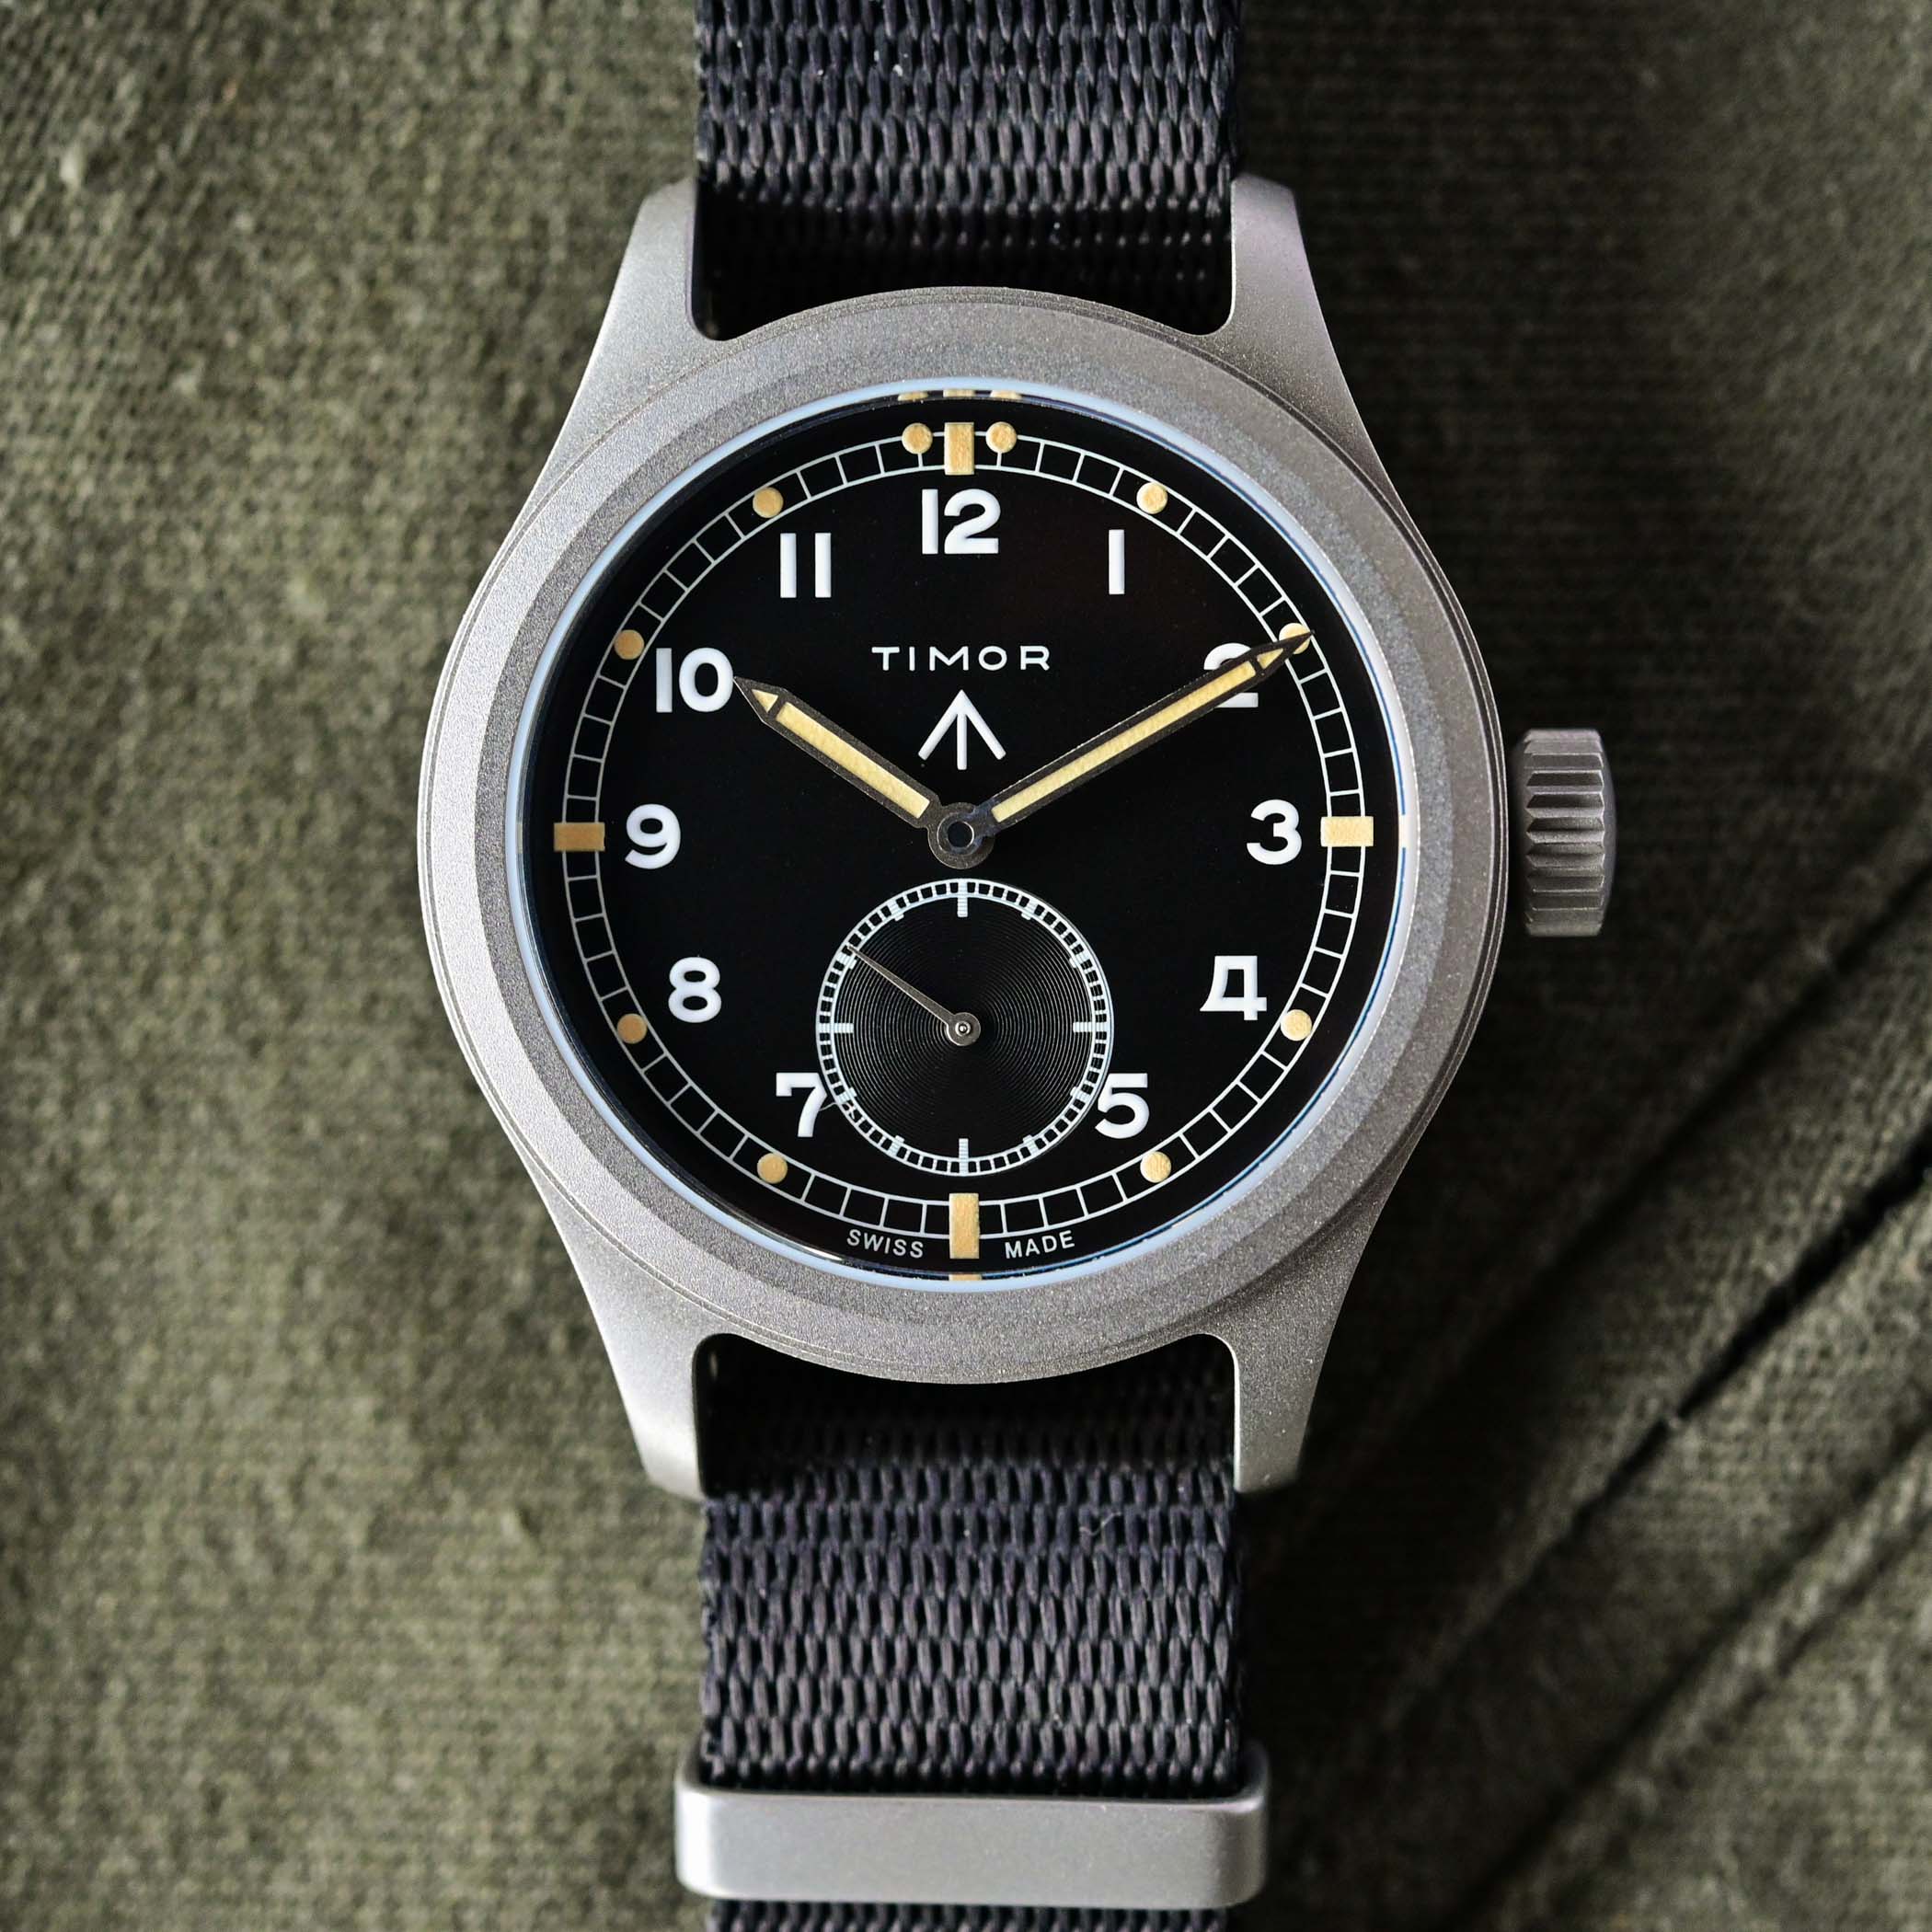 battle of accessible British military-inspired watches - comparative review Hamilton Khaki Pilot Pioneer Mechanical versus Timor Heritage Field - 13